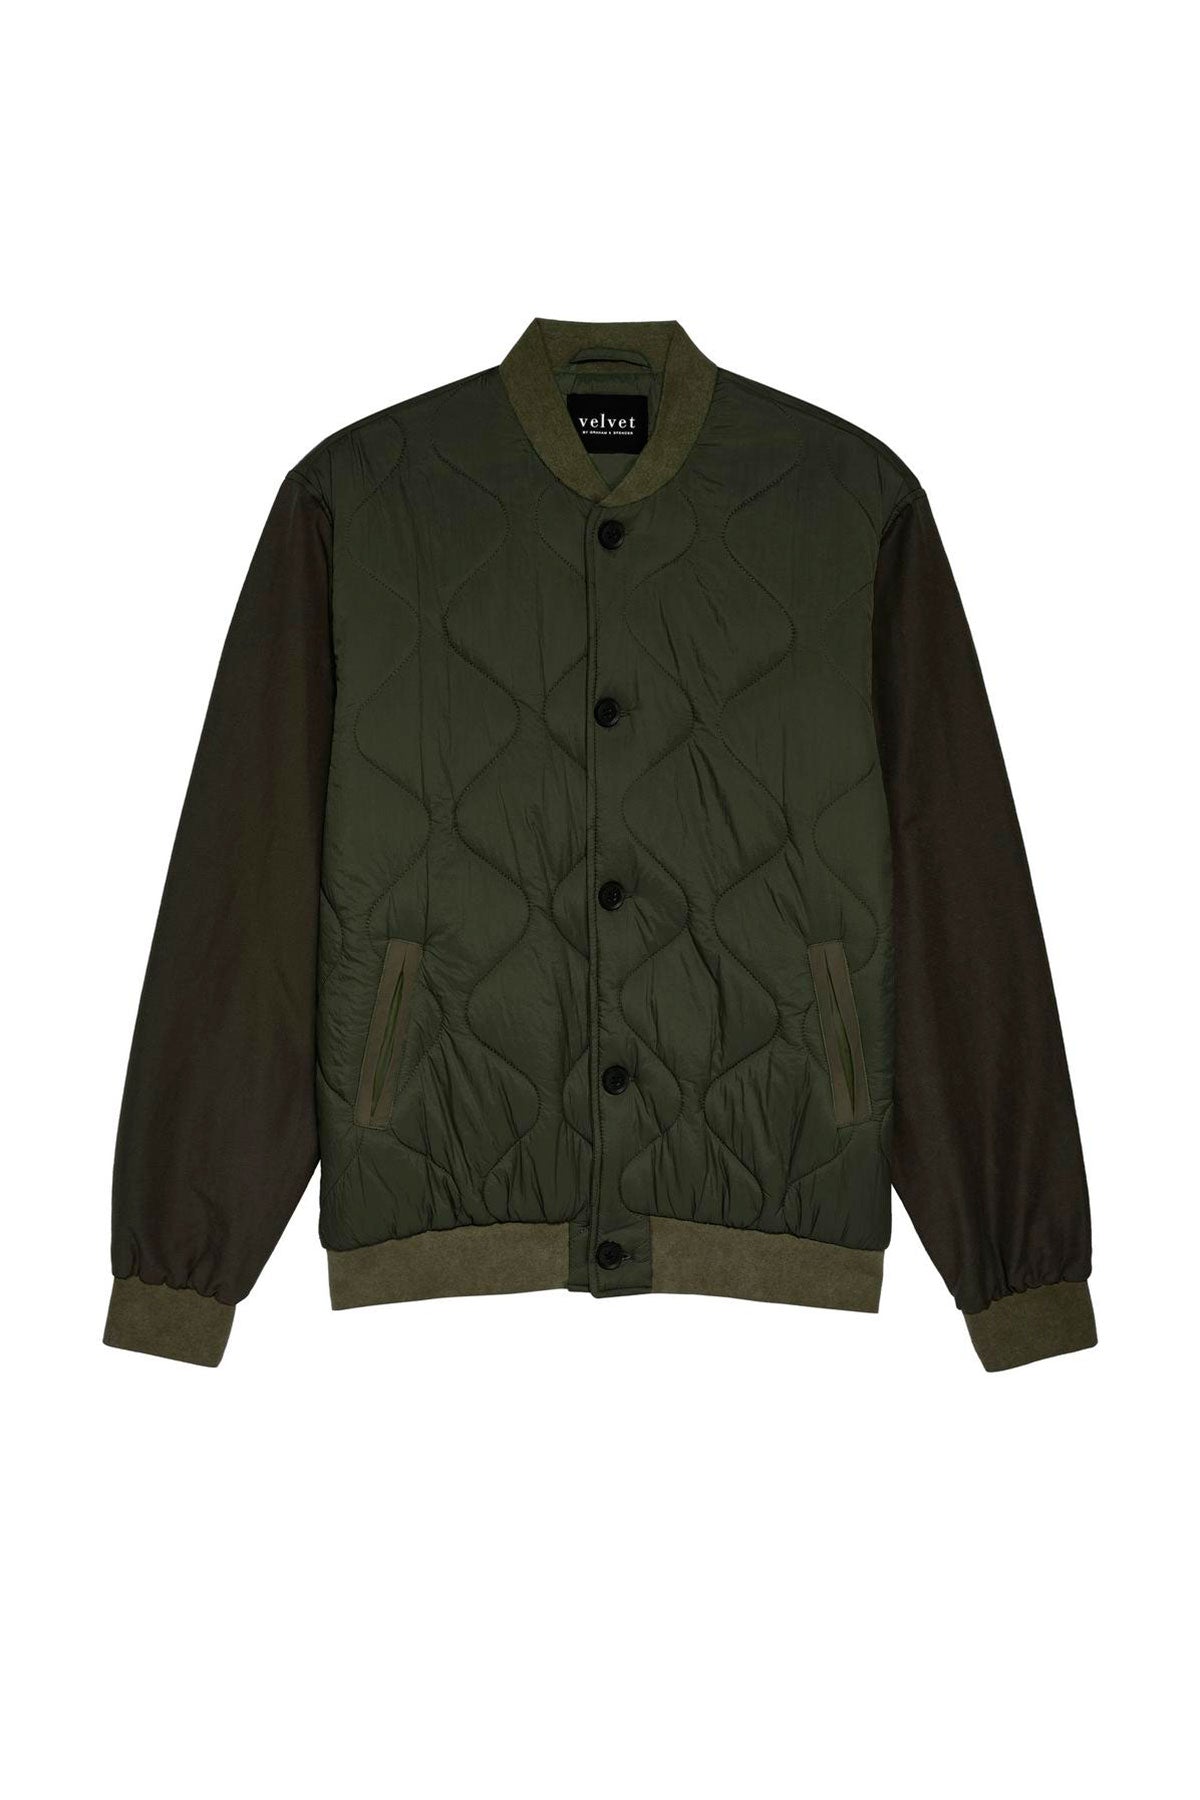 The Velvet by Graham & Spencer MAISON QUILTED JACKET in olive green and black with a quilted nylon body.-35678690705601